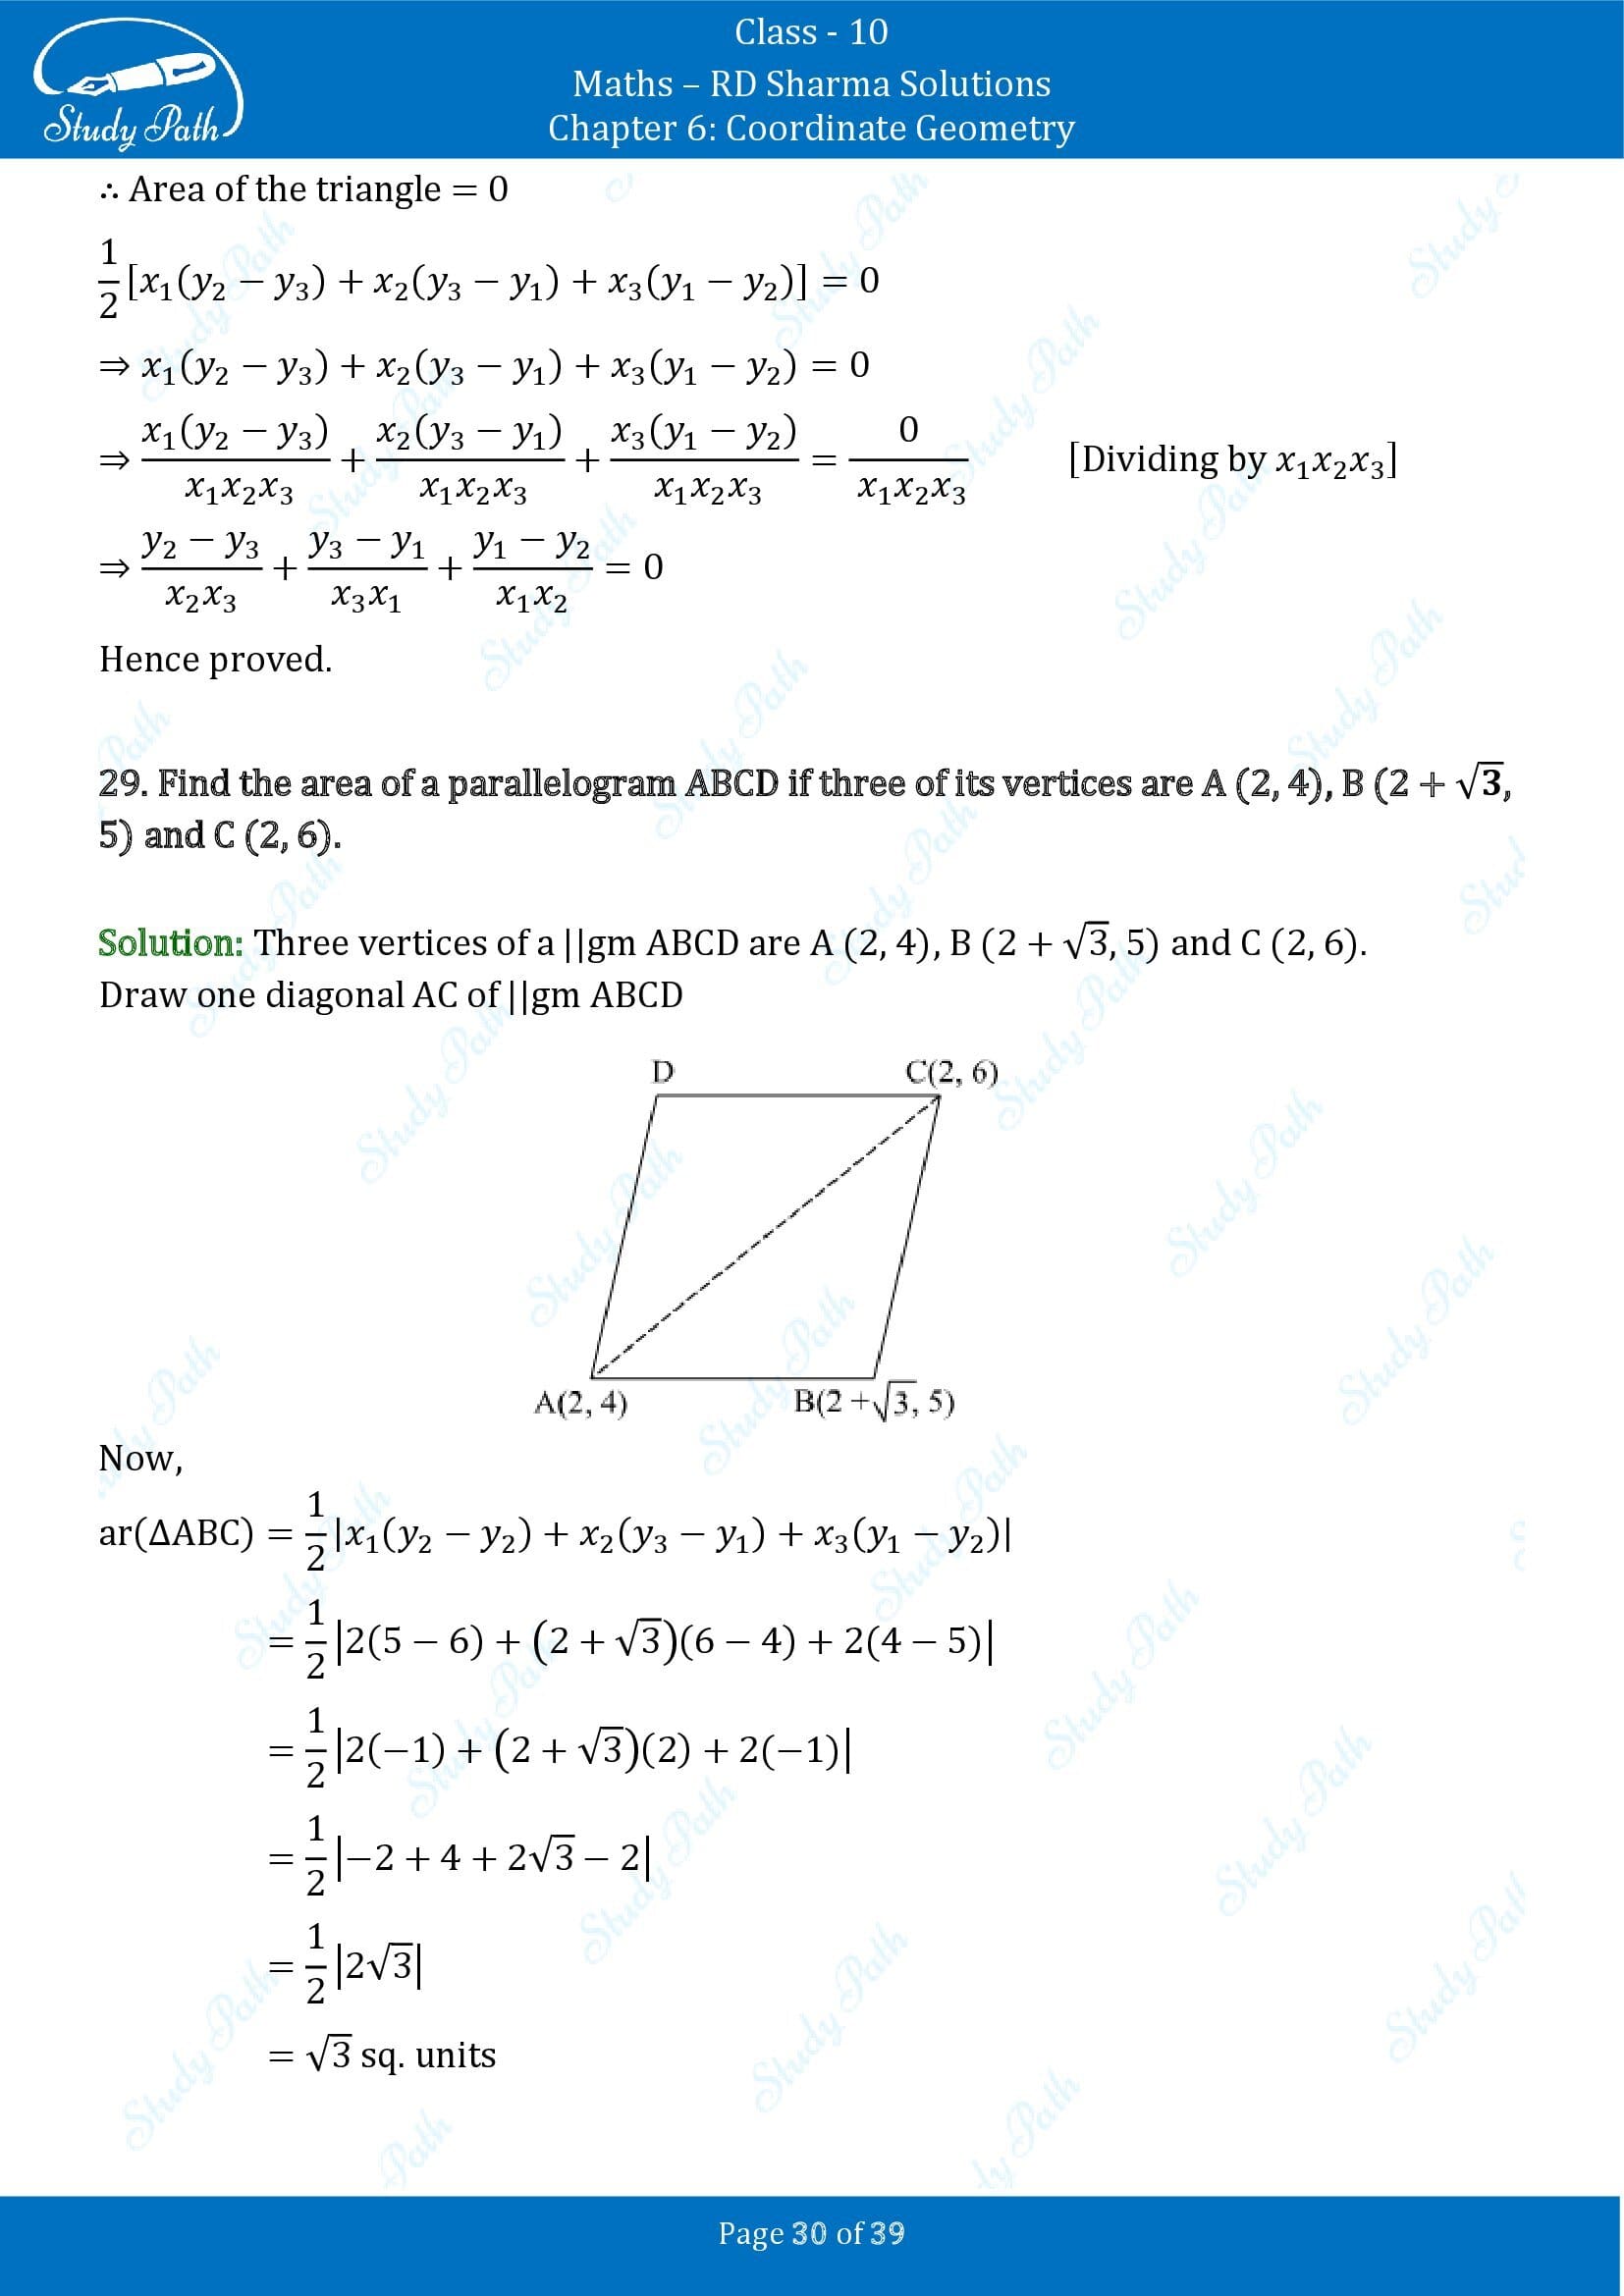 RD Sharma Solutions Class 10 Chapter 6 Coordinate Geometry Exercise 6.5 0030